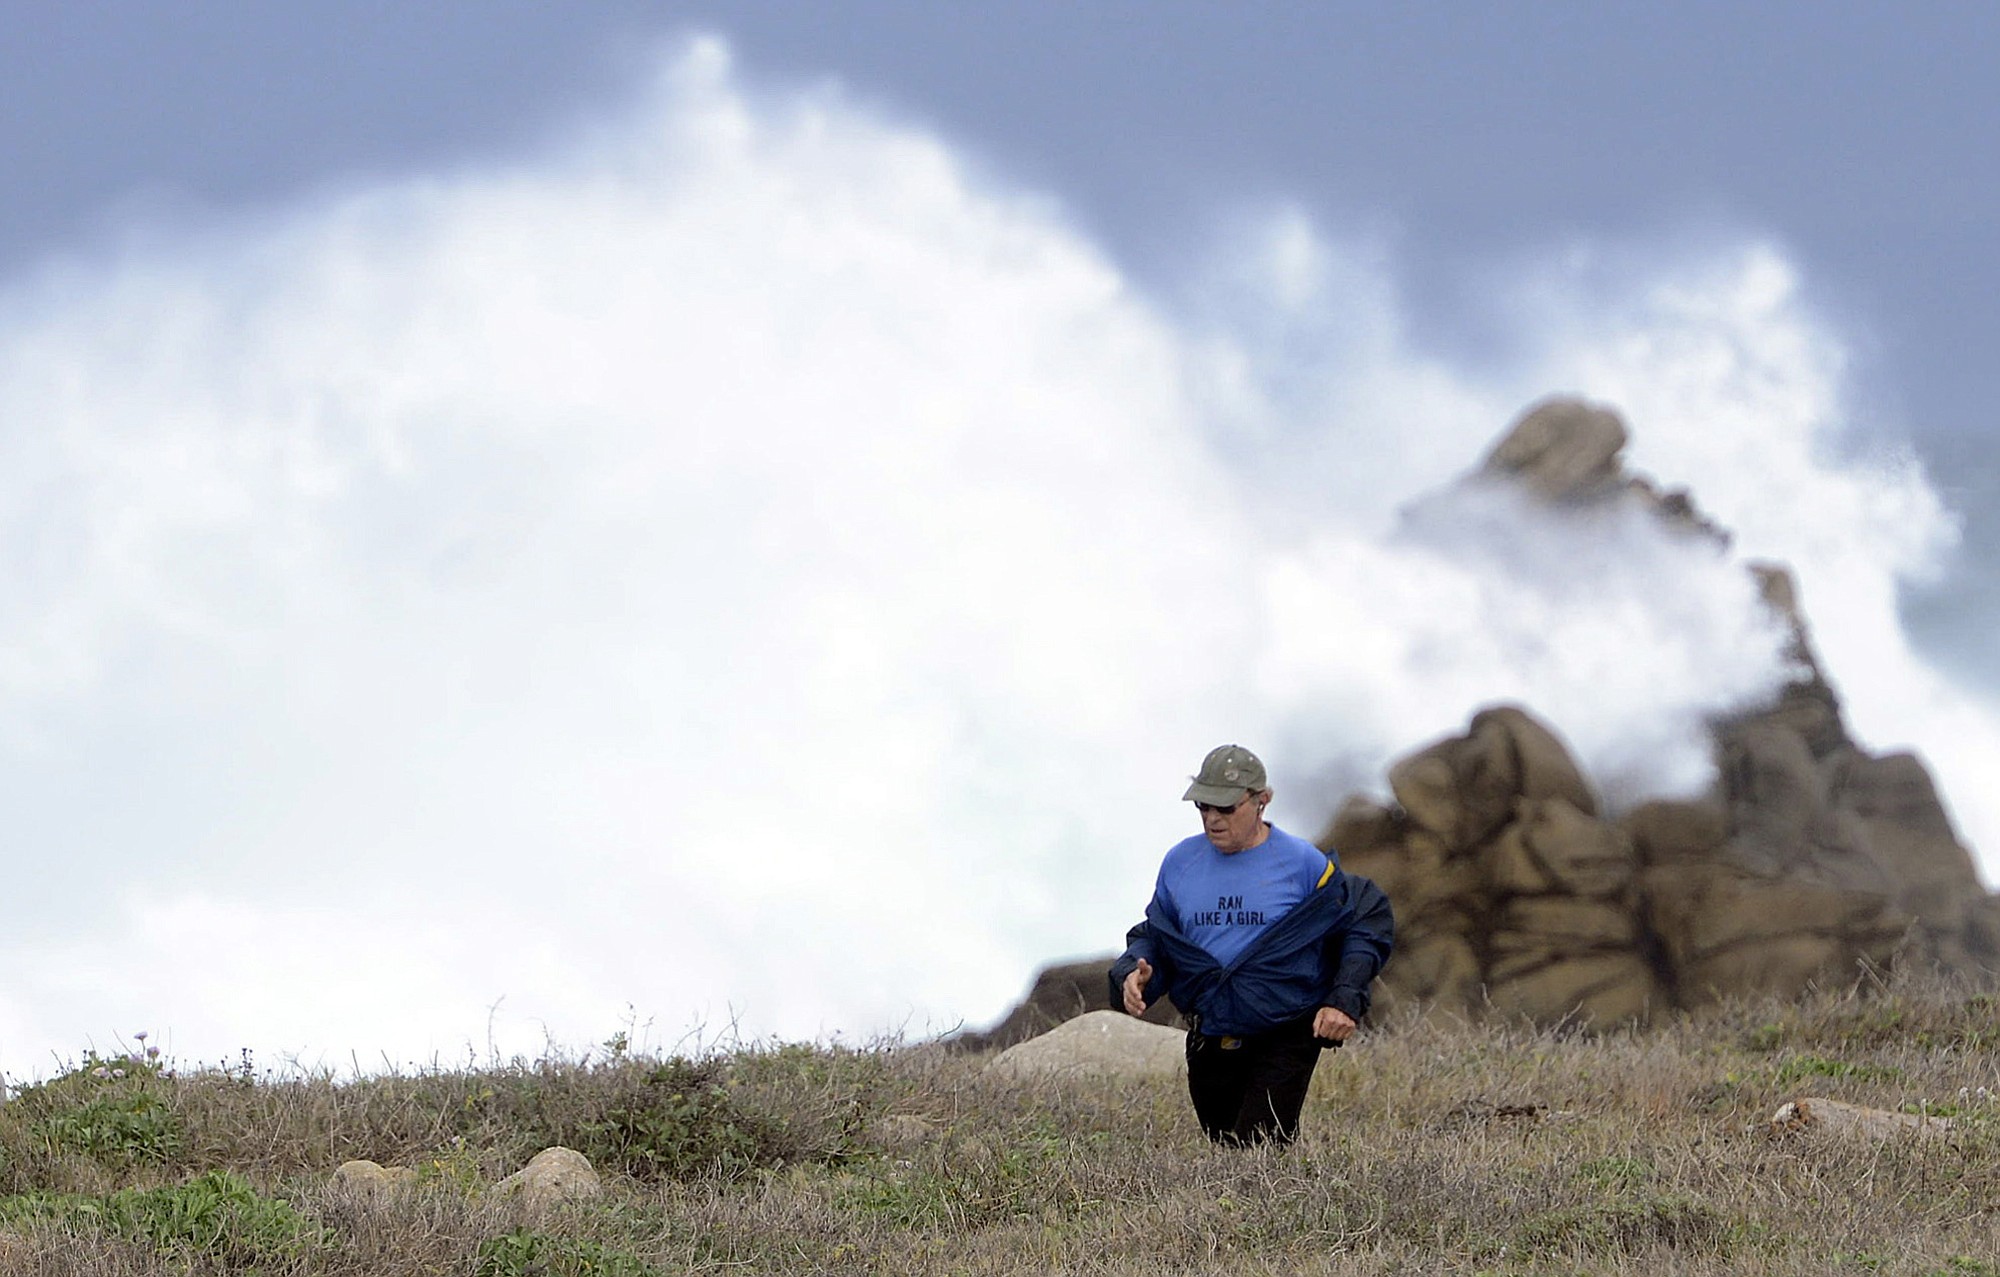 Peter Krasa runs into heavy winds and past large waves breaking along the shore between Point Joe and Bird Rock in Pebble Beach, Calif., as a storm blows in on Friday.